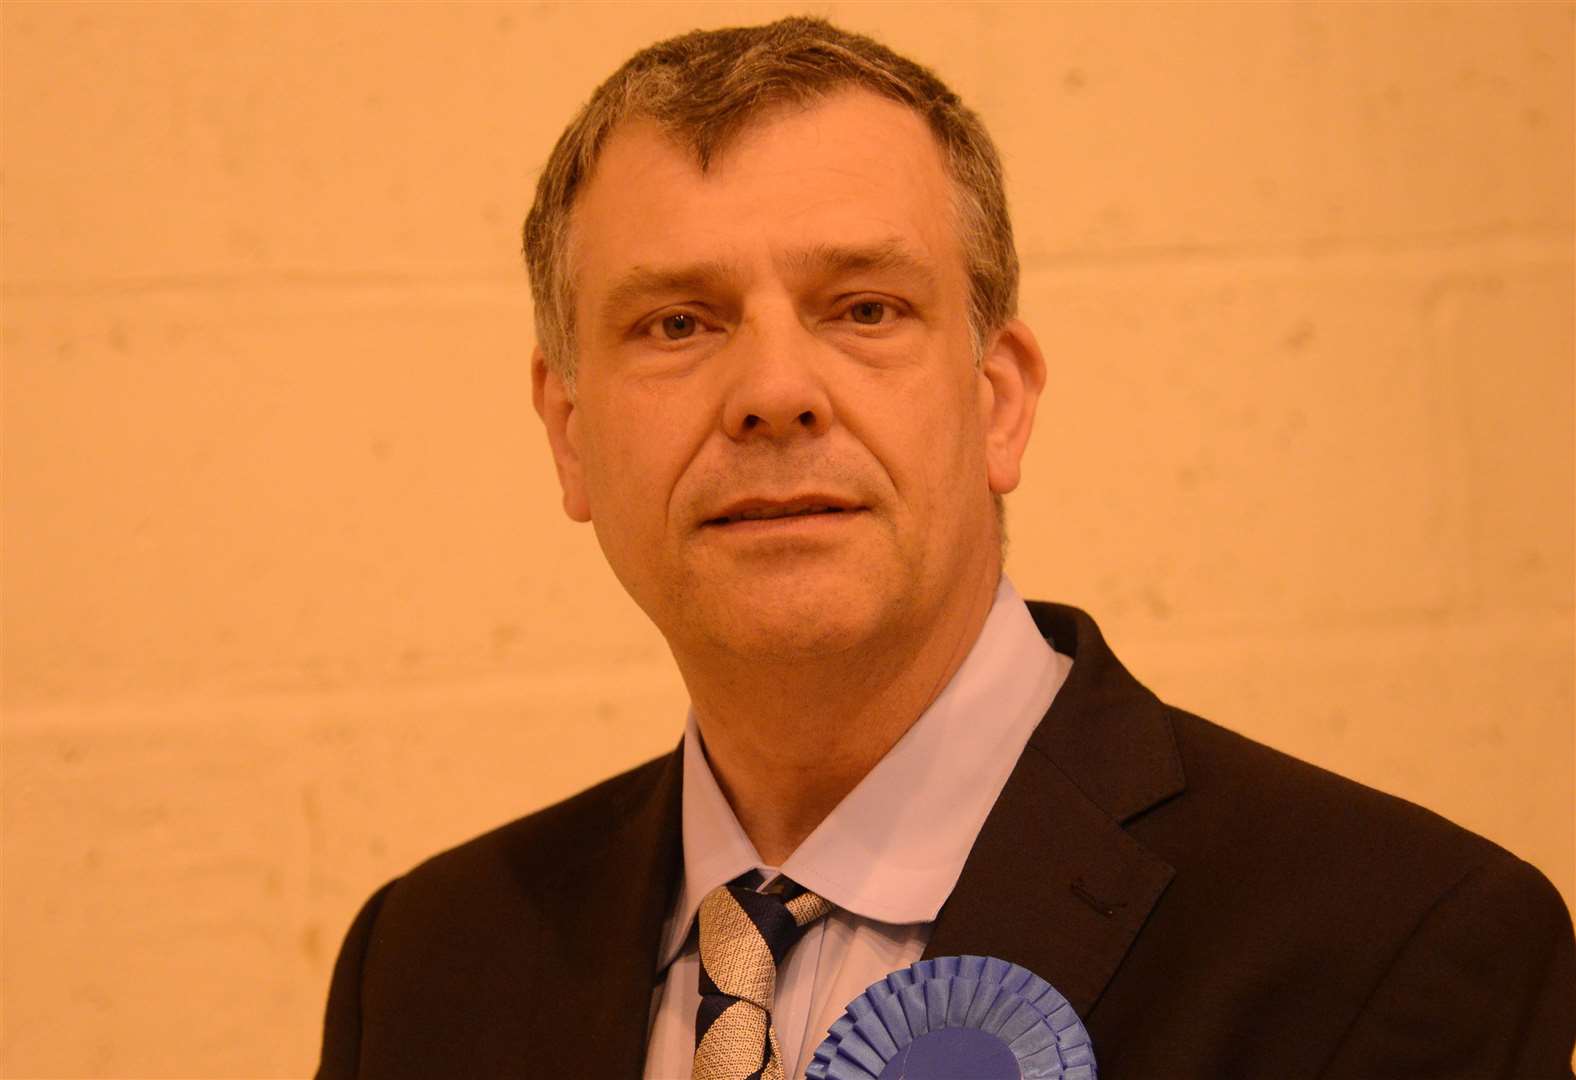 Cllr Paul Bartlett (Con) lives close to the site in Sevington